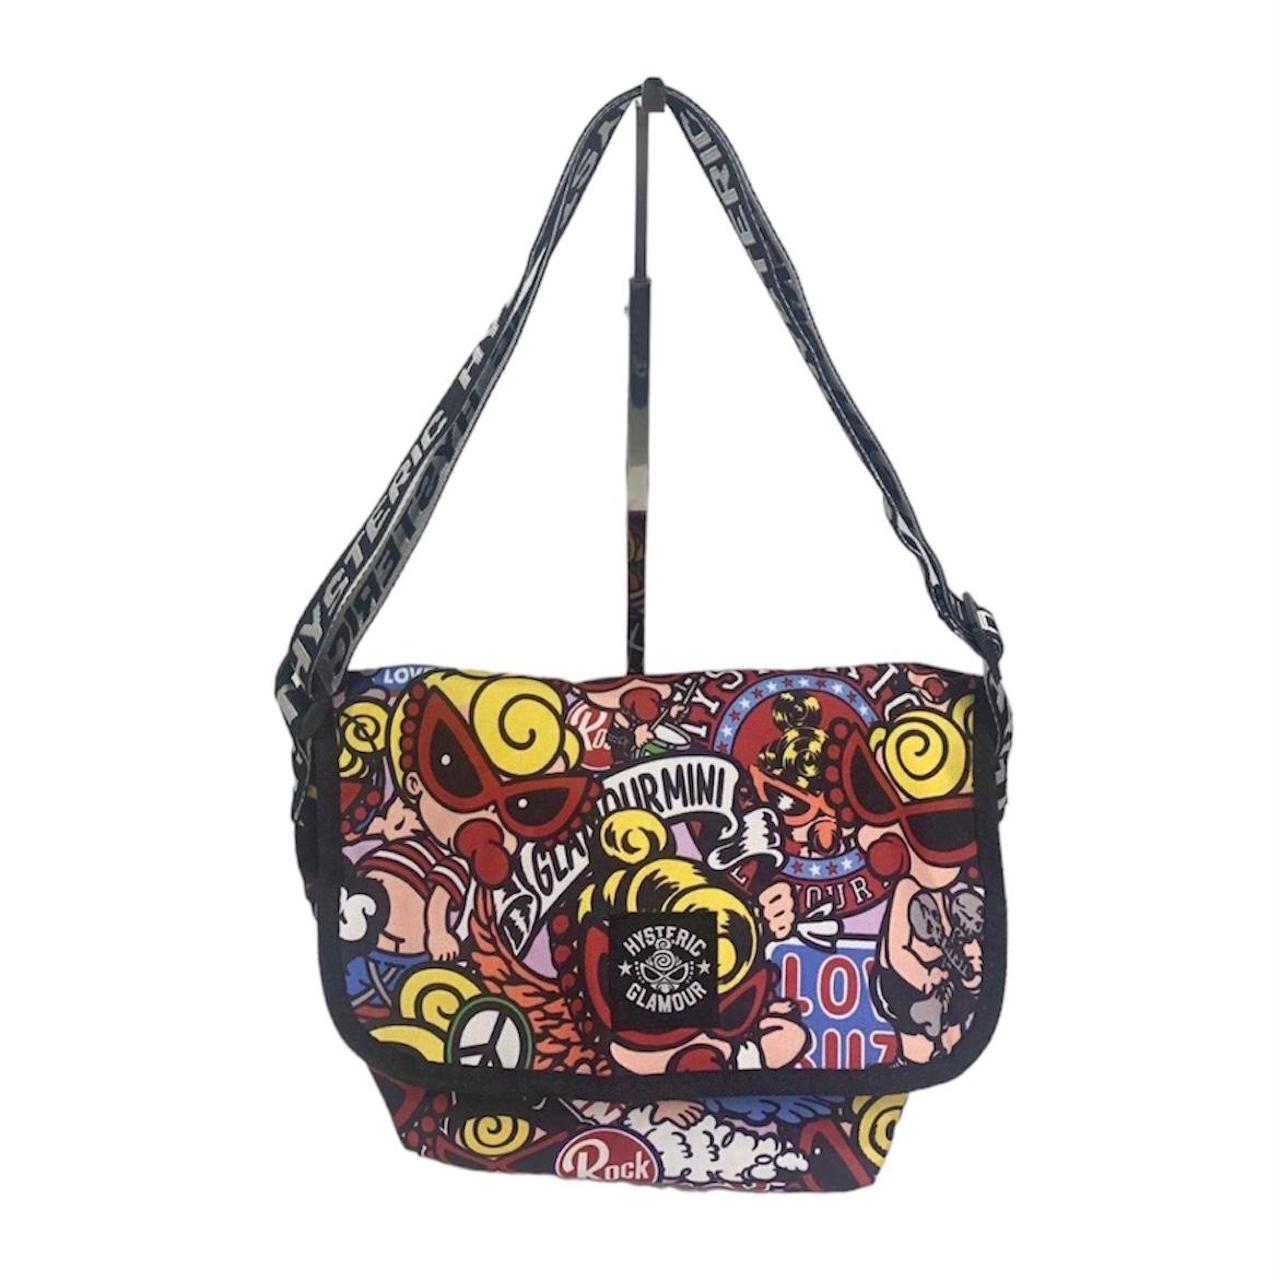 Hysteric Glamour shoulder bag Hysteric Glamour - Depop